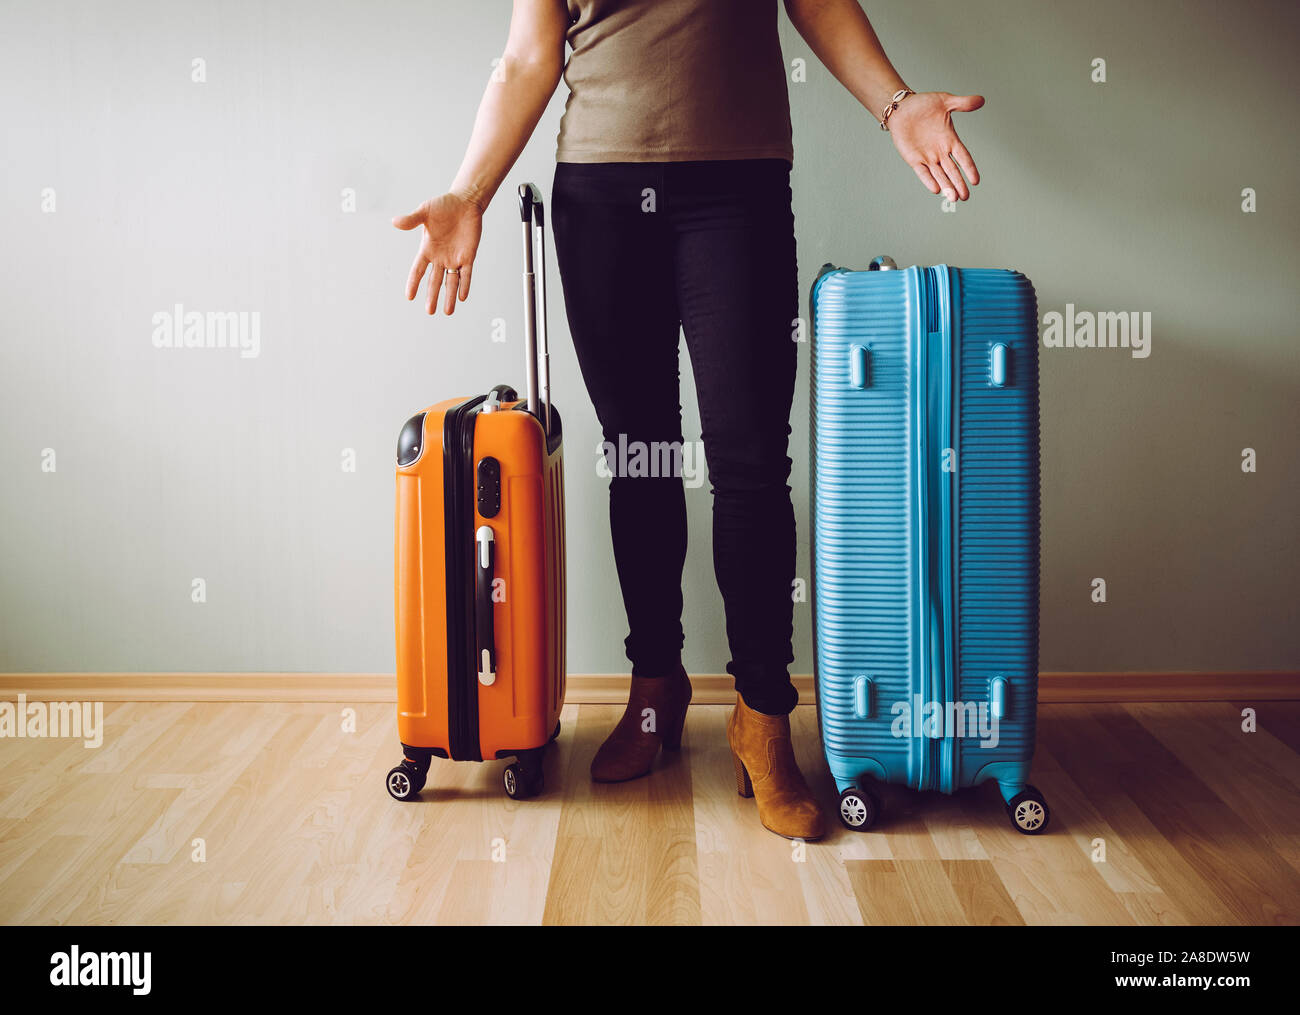 Confused air passenger standing with luggage, stranded in airport. Traveling agency bankruptcy concept. Stock Photo